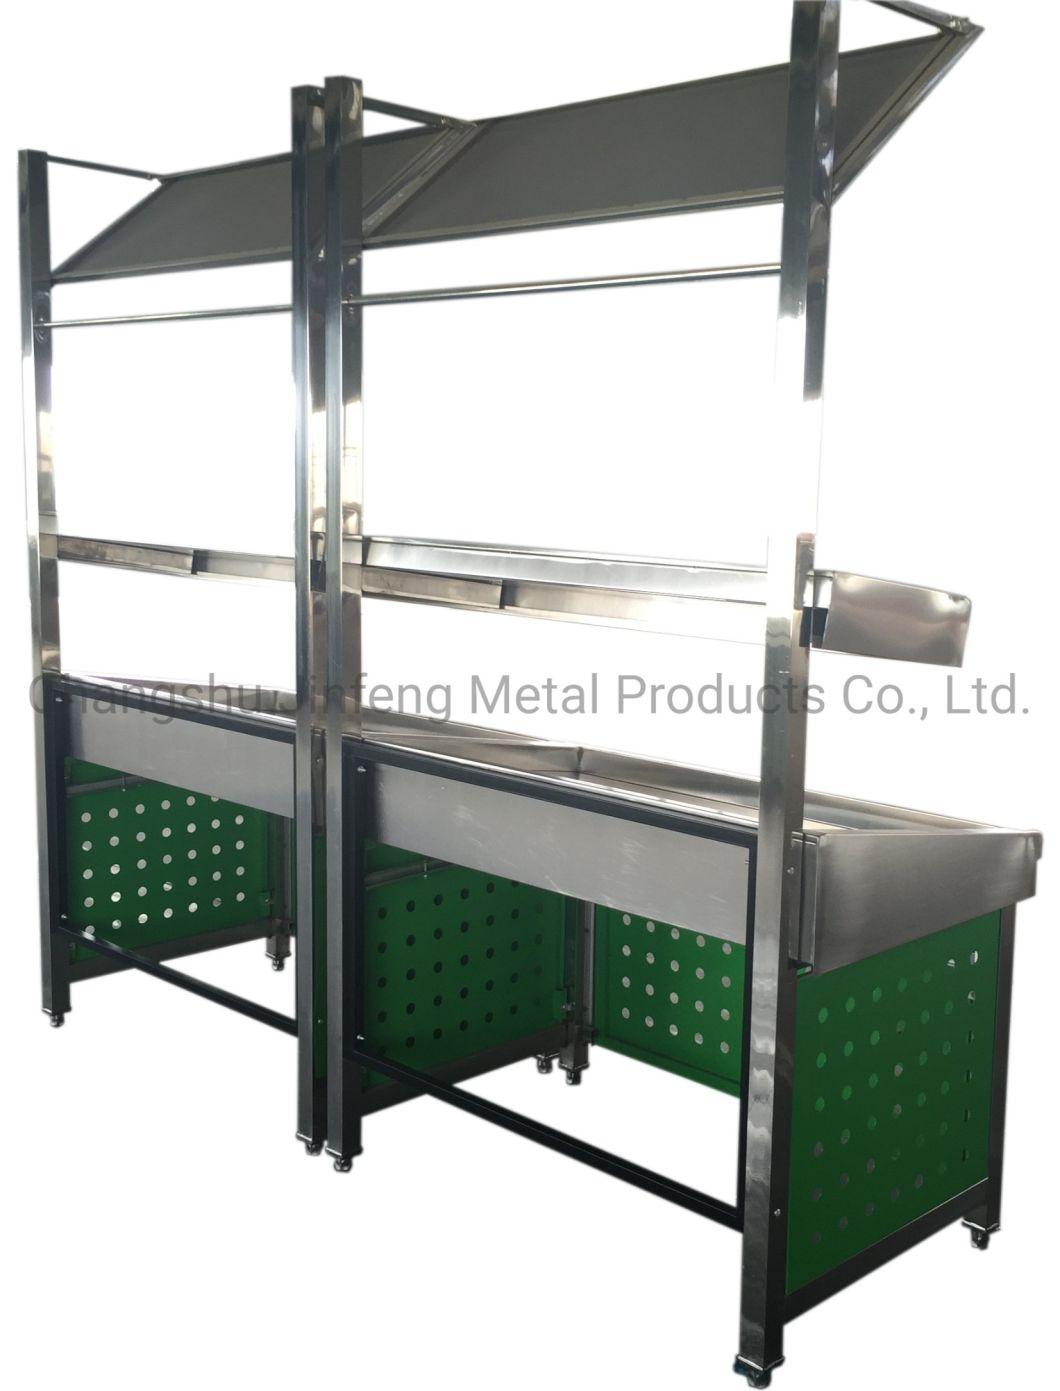 Customized Supermarket Double Layers Display Stand Shelf for Fruit and Vegetable